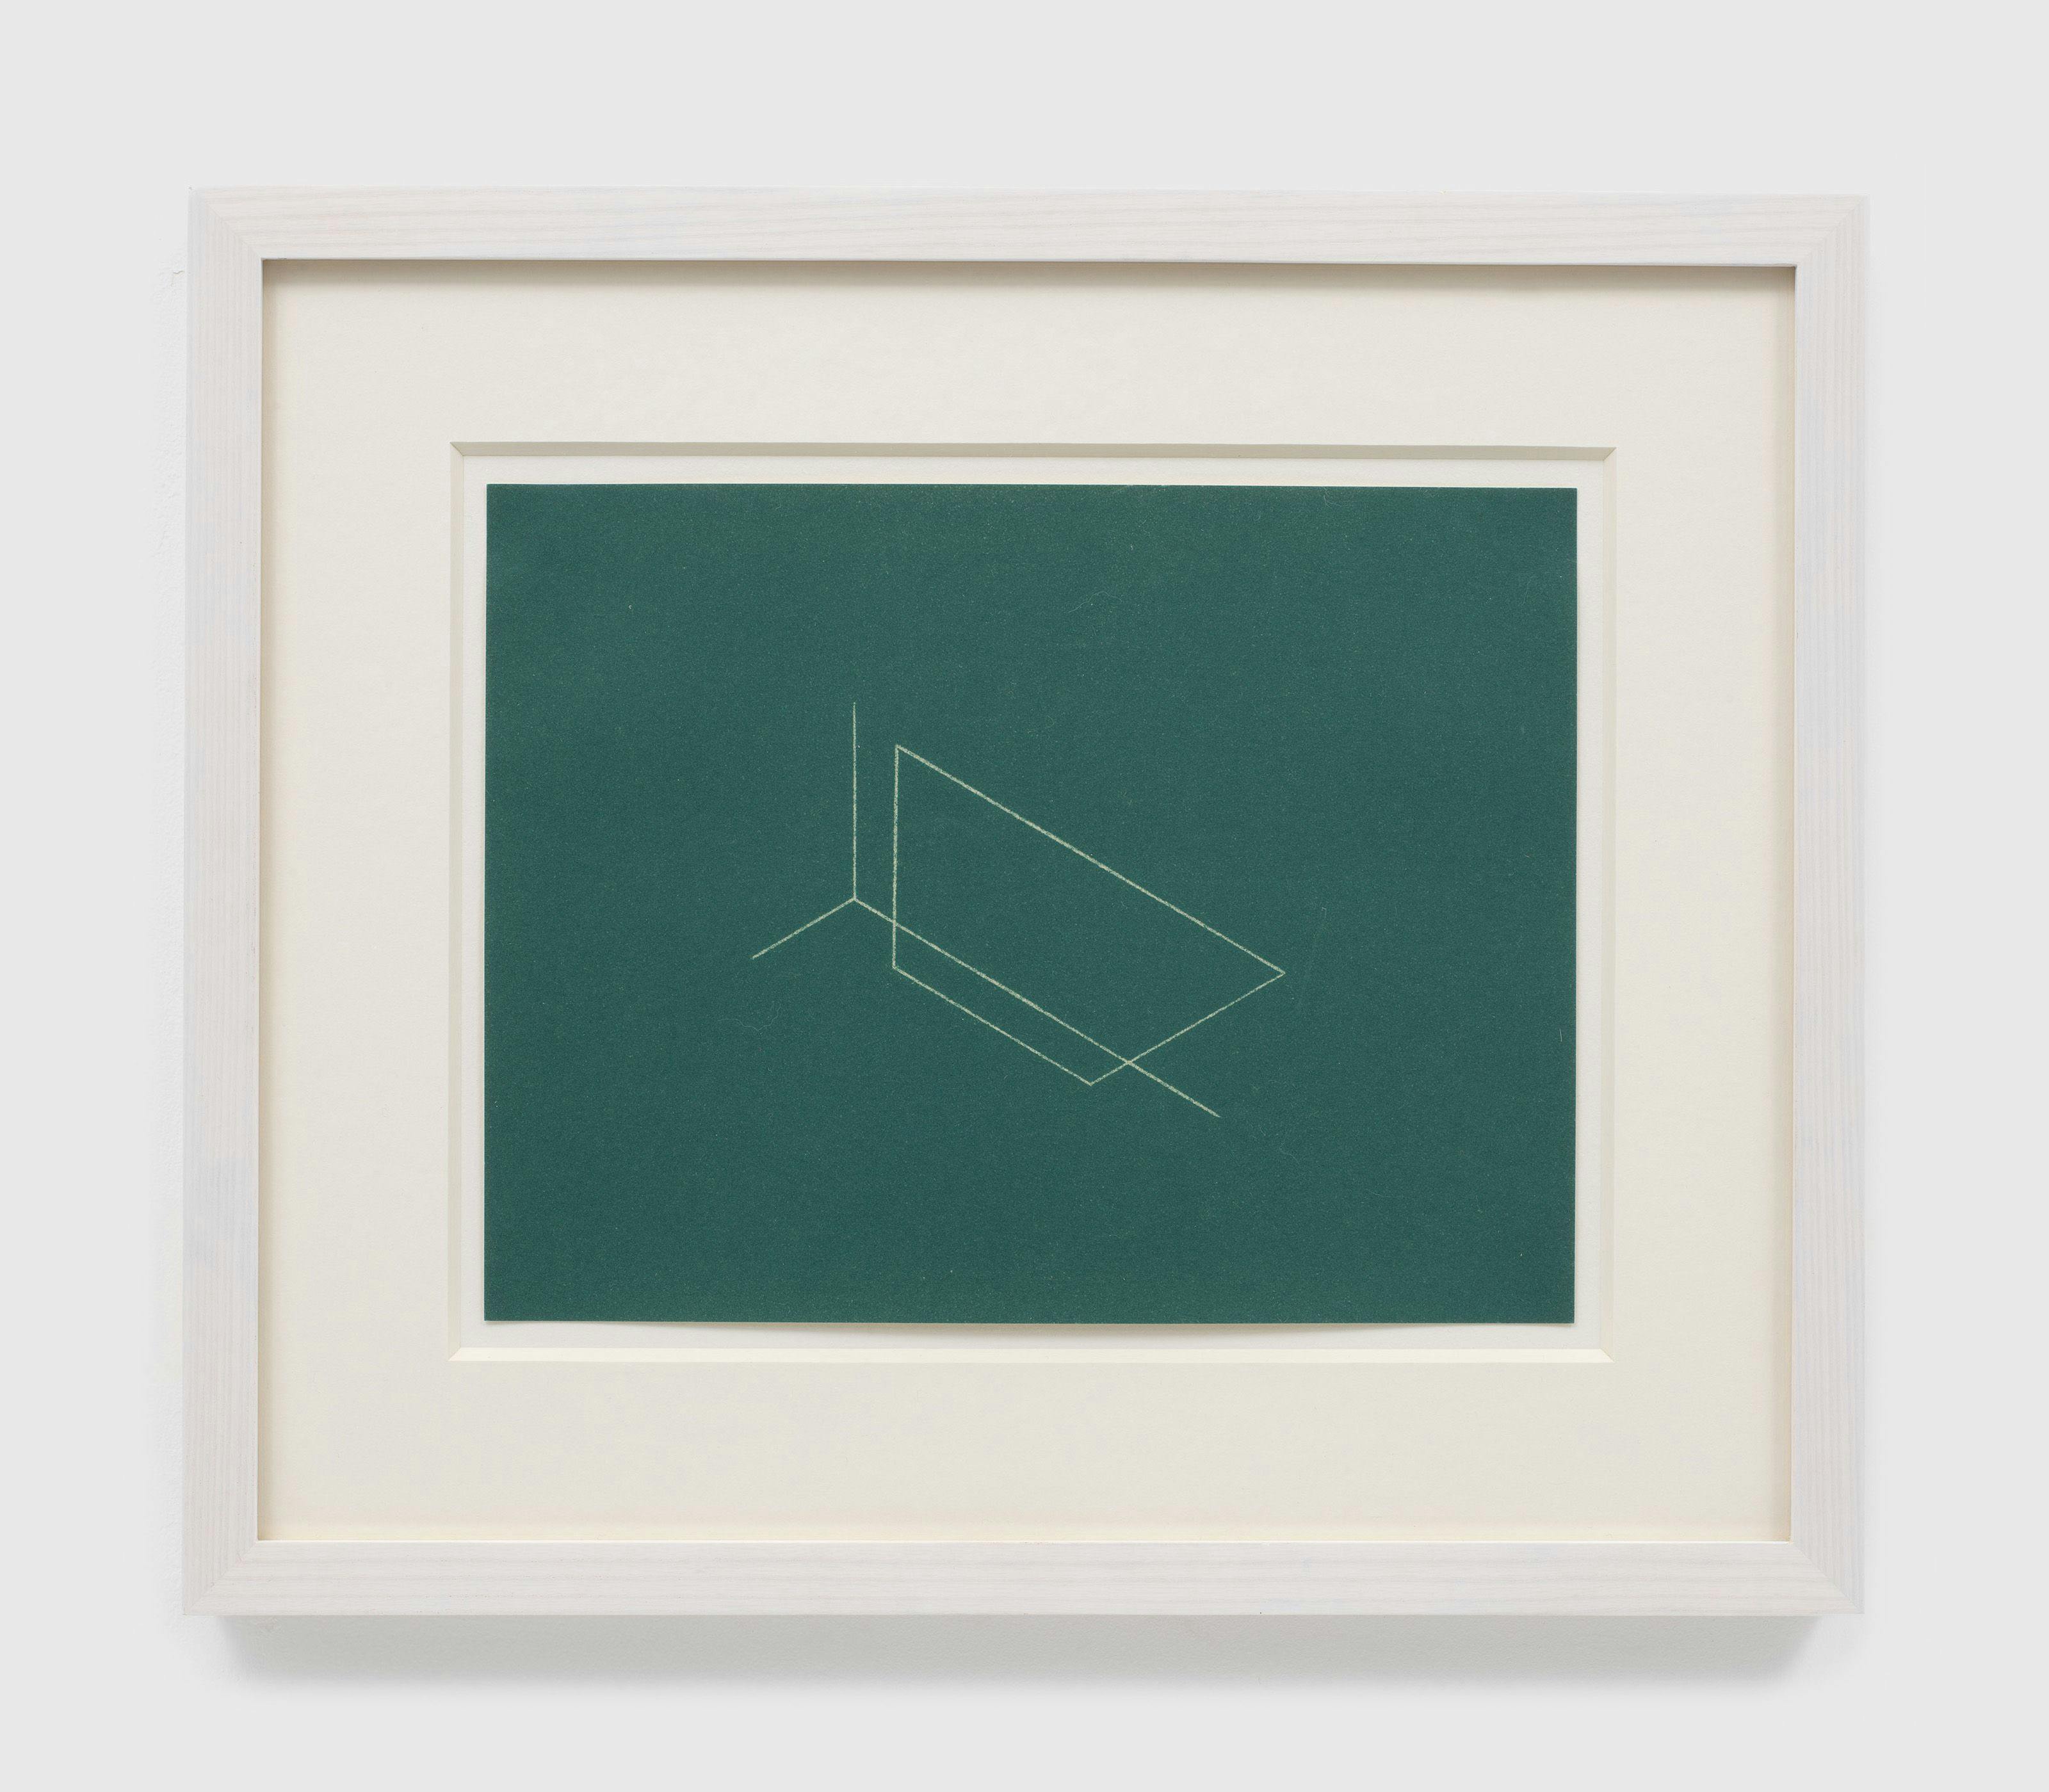 A print by Fred Sandback, titled Untitled (from Twenty-two Constructions from 1967), dated 1986.